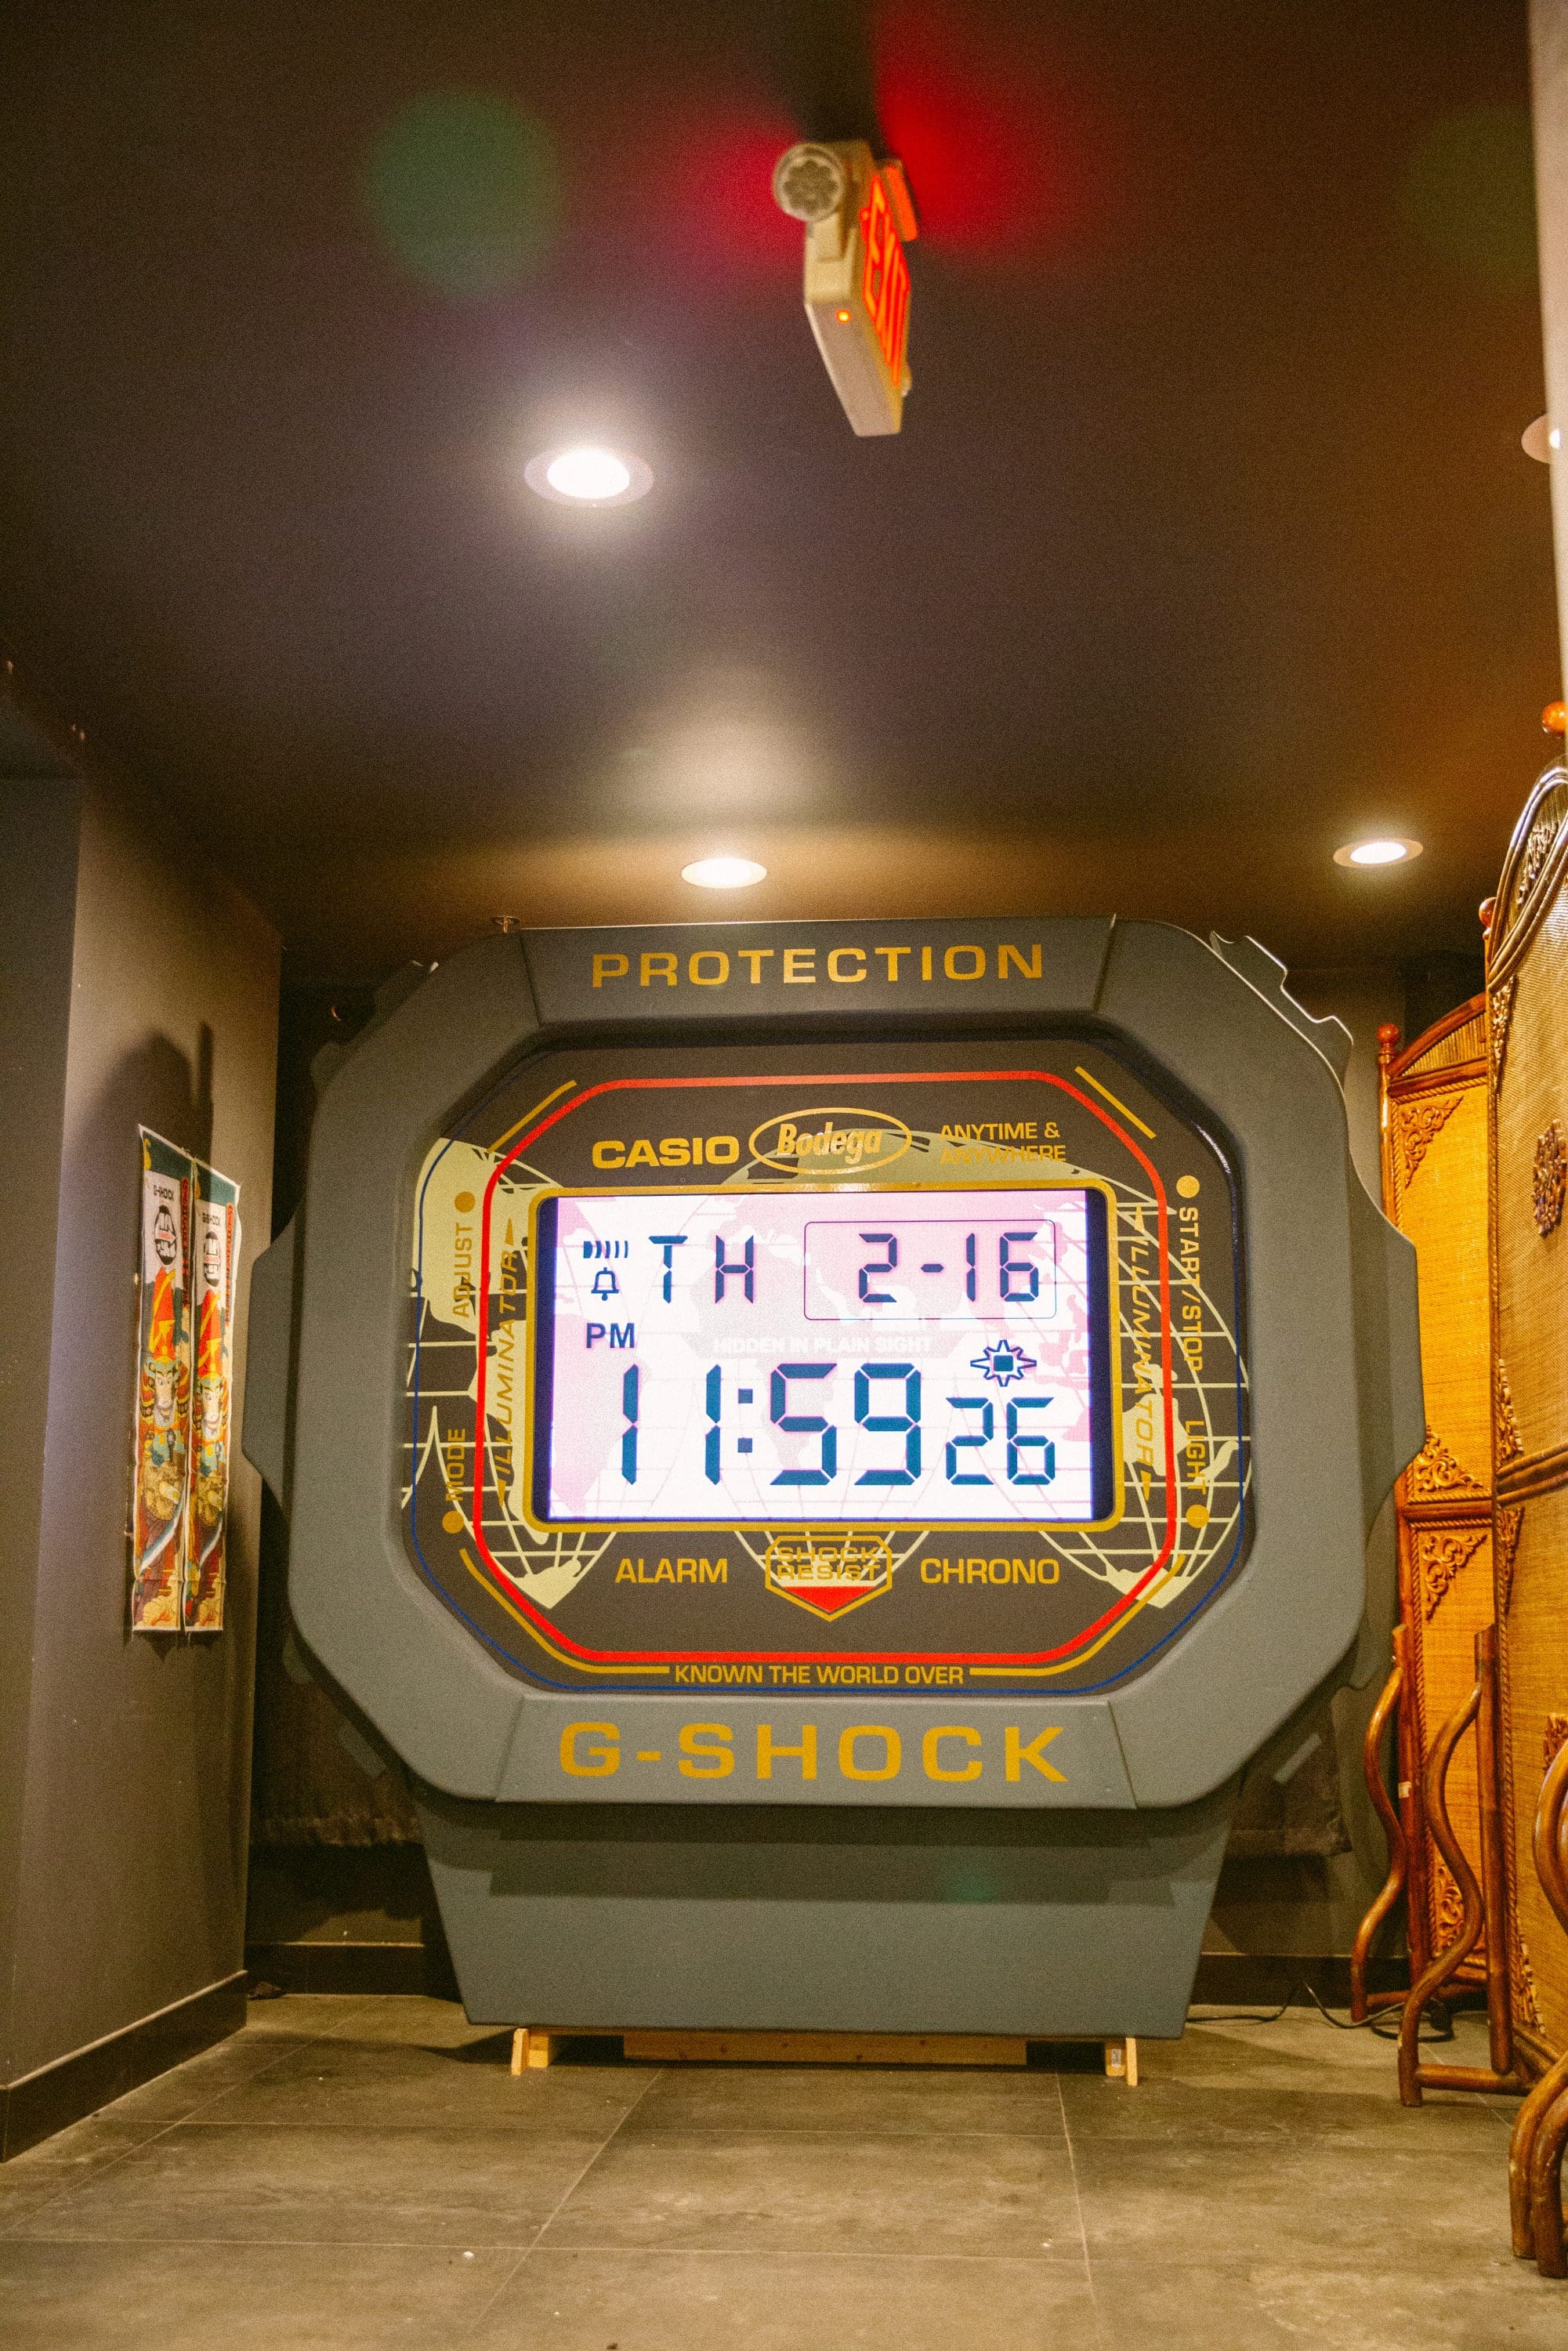 A giant wall-size version of the Bodega x G-SHOCK DW5600BDG23-1 watch